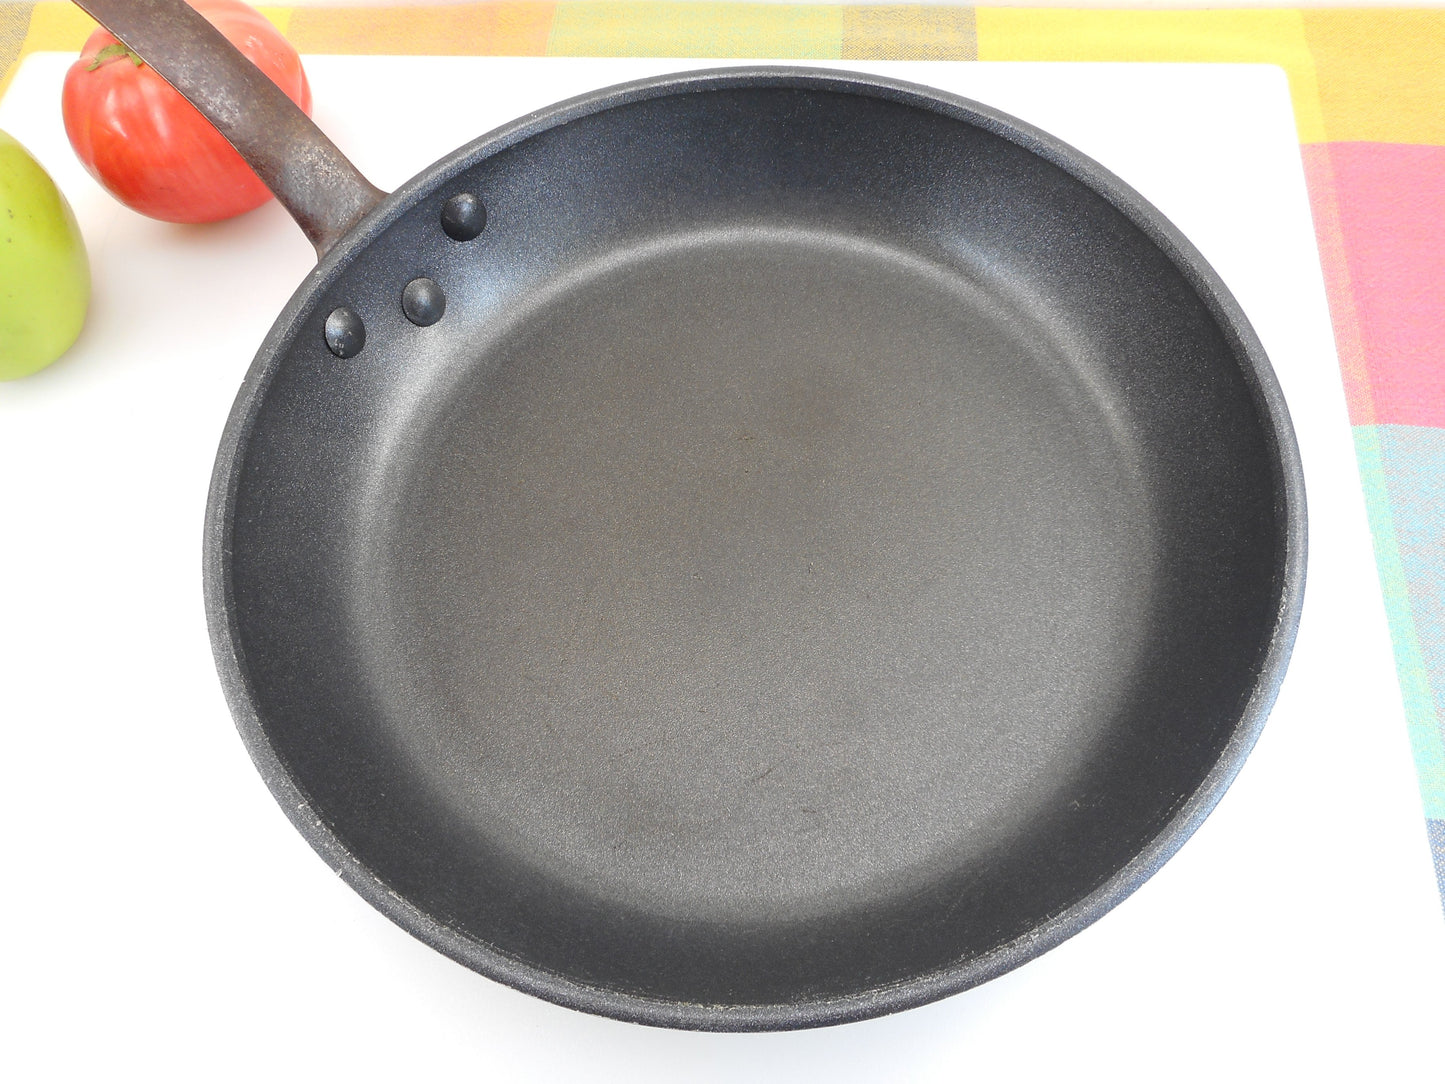 Unbranded Commercial Style 11" Chef Fry Pan Skillet - Non-stick Aluminum Cast Iron Handle Restaurant